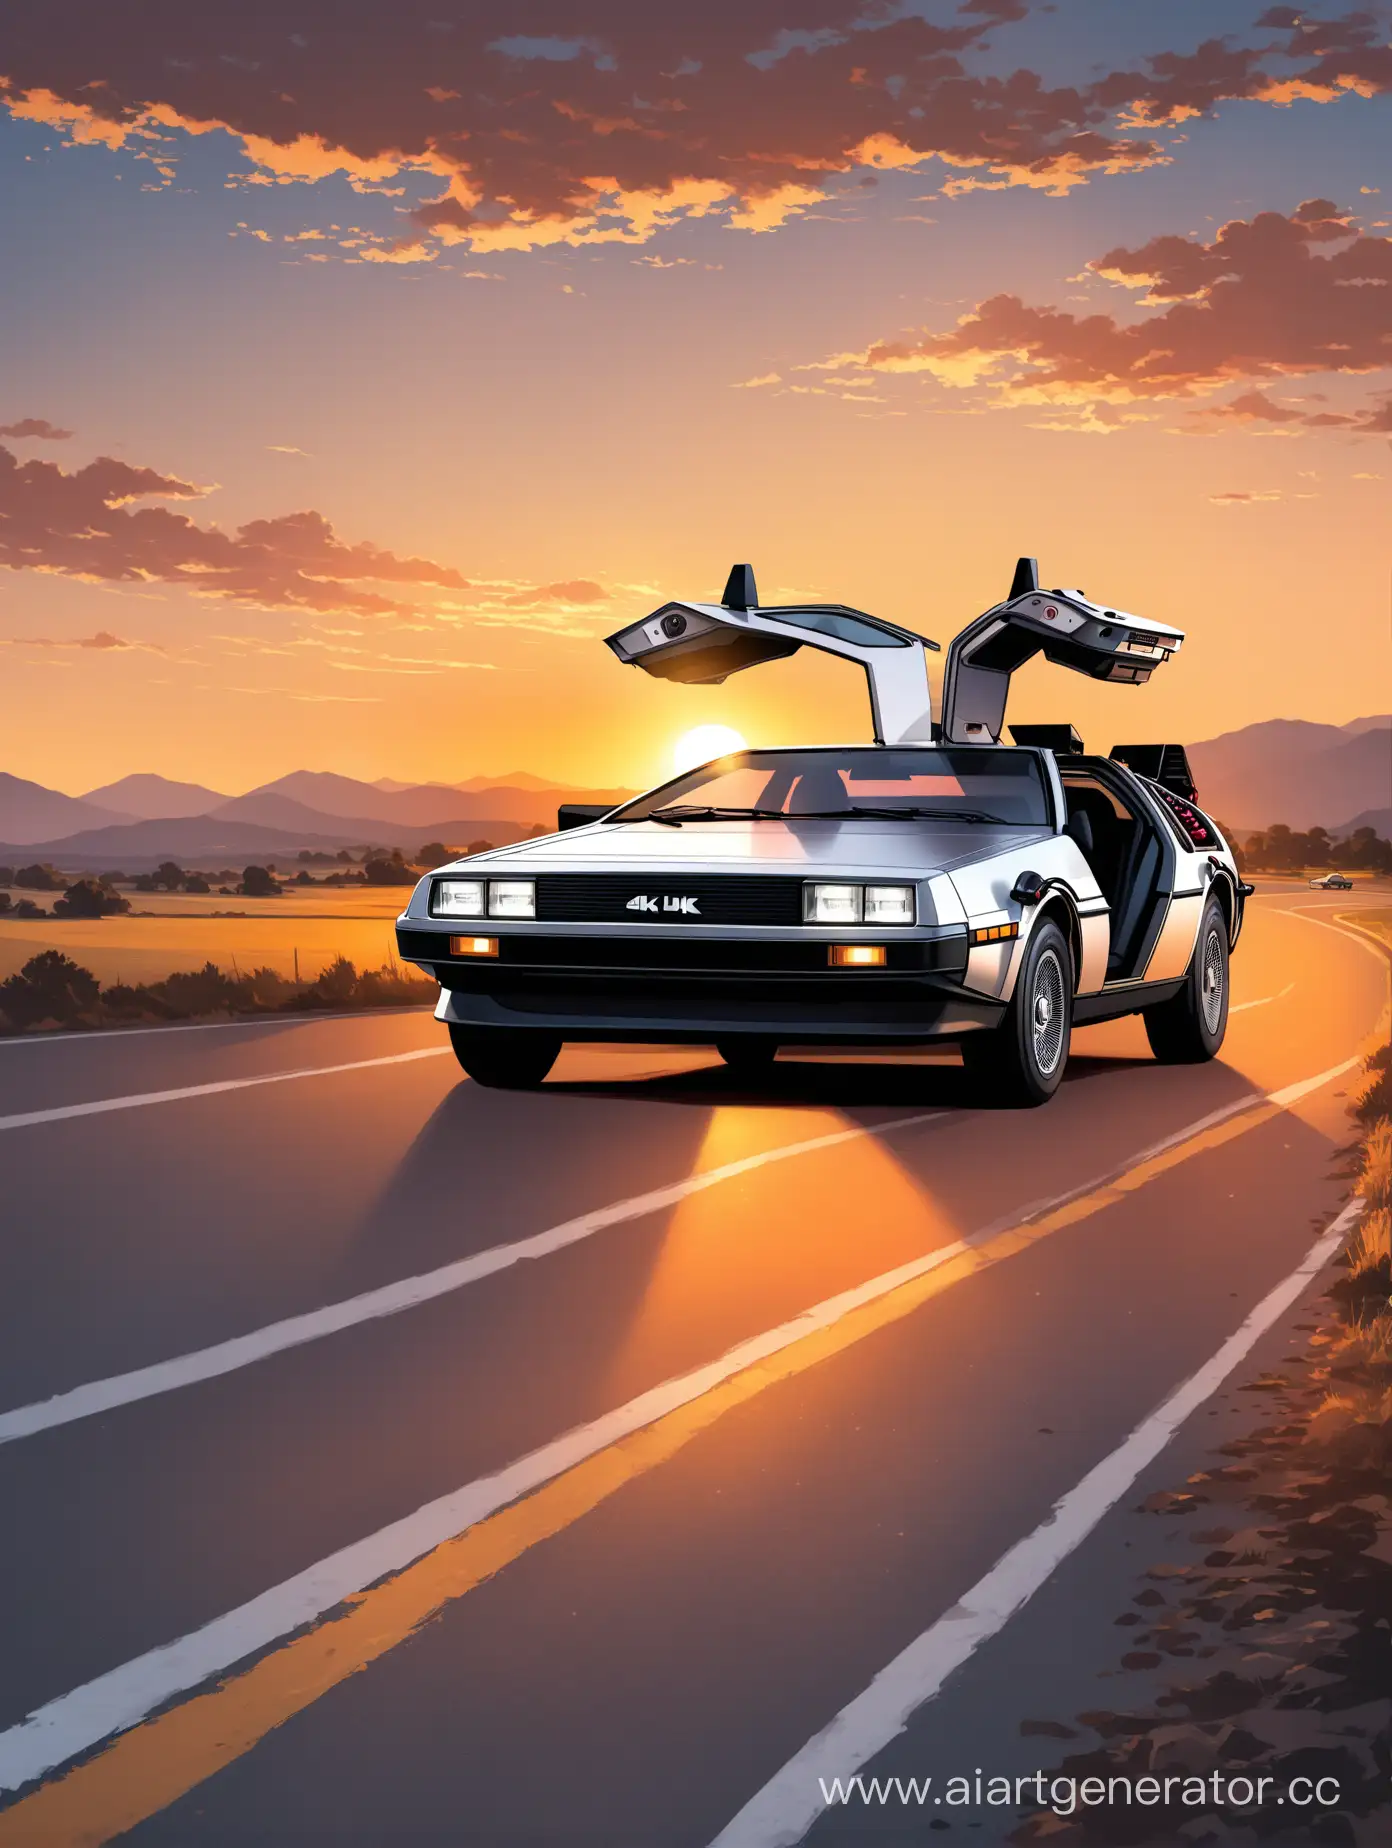 Sunset-Drive-in-4K-with-DeLorean-Time-Machine